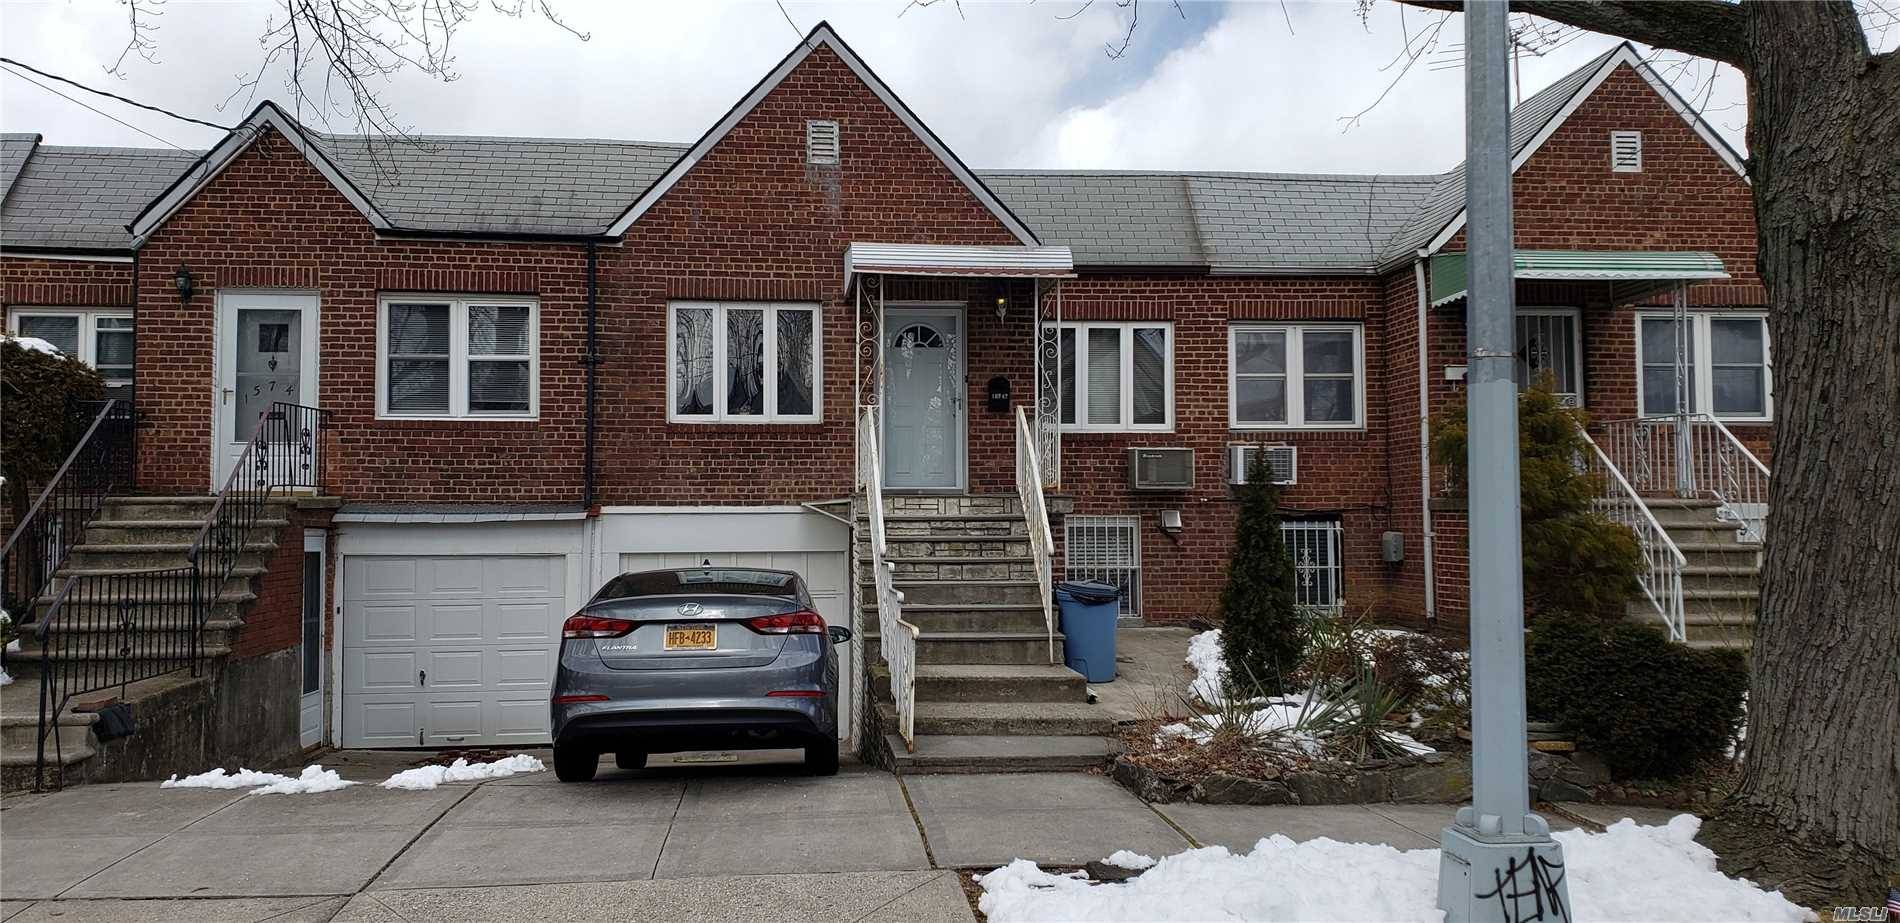 Great price for this starter home with full finished basement.